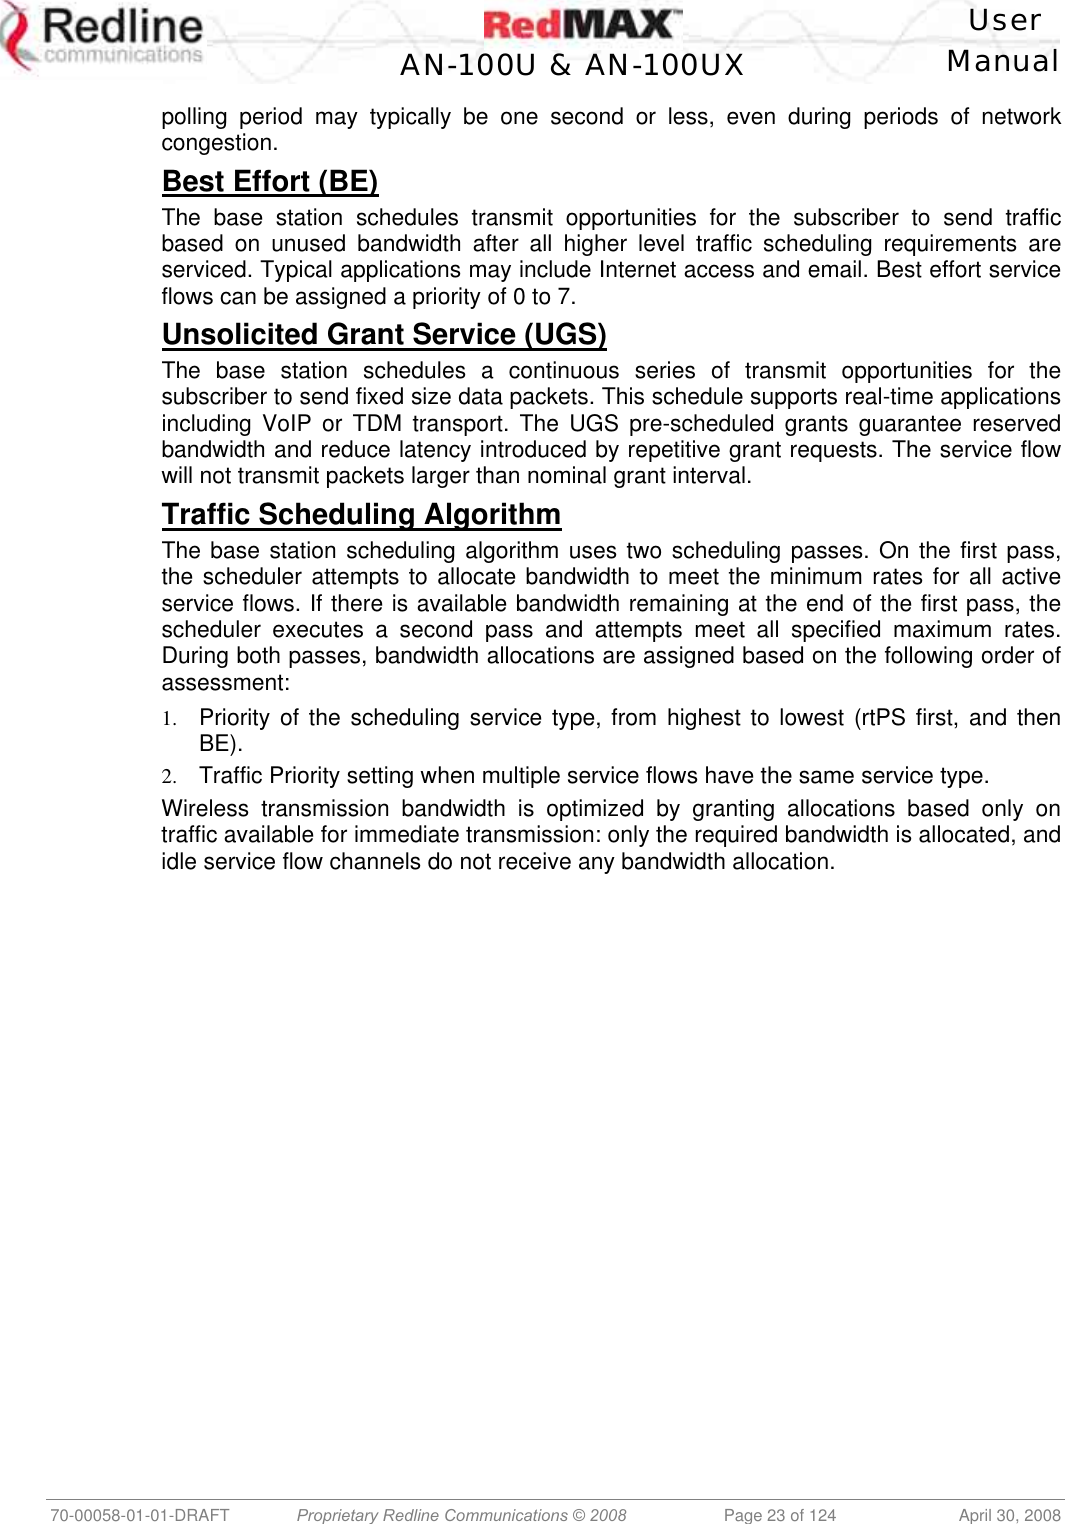    User  AN-100U &amp; AN-100UX Manual   70-00058-01-01-DRAFT  Proprietary Redline Communications © 2008   Page 23 of 124  April 30, 2008 polling period may typically be one second or less, even during periods of network congestion. Best Effort (BE) The base station schedules transmit opportunities for the subscriber to send traffic based on unused bandwidth after all higher level traffic scheduling requirements are serviced. Typical applications may include Internet access and email. Best effort service flows can be assigned a priority of 0 to 7. Unsolicited Grant Service (UGS) The base station schedules a continuous series of transmit opportunities for the subscriber to send fixed size data packets. This schedule supports real-time applications including VoIP or TDM transport. The UGS pre-scheduled grants guarantee reserved bandwidth and reduce latency introduced by repetitive grant requests. The service flow will not transmit packets larger than nominal grant interval. Traffic Scheduling Algorithm The base station scheduling algorithm uses two scheduling passes. On the first pass, the scheduler attempts to allocate bandwidth to meet the minimum rates for all active service flows. If there is available bandwidth remaining at the end of the first pass, the scheduler executes a second pass and attempts meet all specified maximum rates. During both passes, bandwidth allocations are assigned based on the following order of assessment: 1.  Priority of the scheduling service type, from highest to lowest (rtPS first, and then BE). 2.  Traffic Priority setting when multiple service flows have the same service type. Wireless transmission bandwidth is optimized by granting allocations based only on traffic available for immediate transmission: only the required bandwidth is allocated, and idle service flow channels do not receive any bandwidth allocation.  